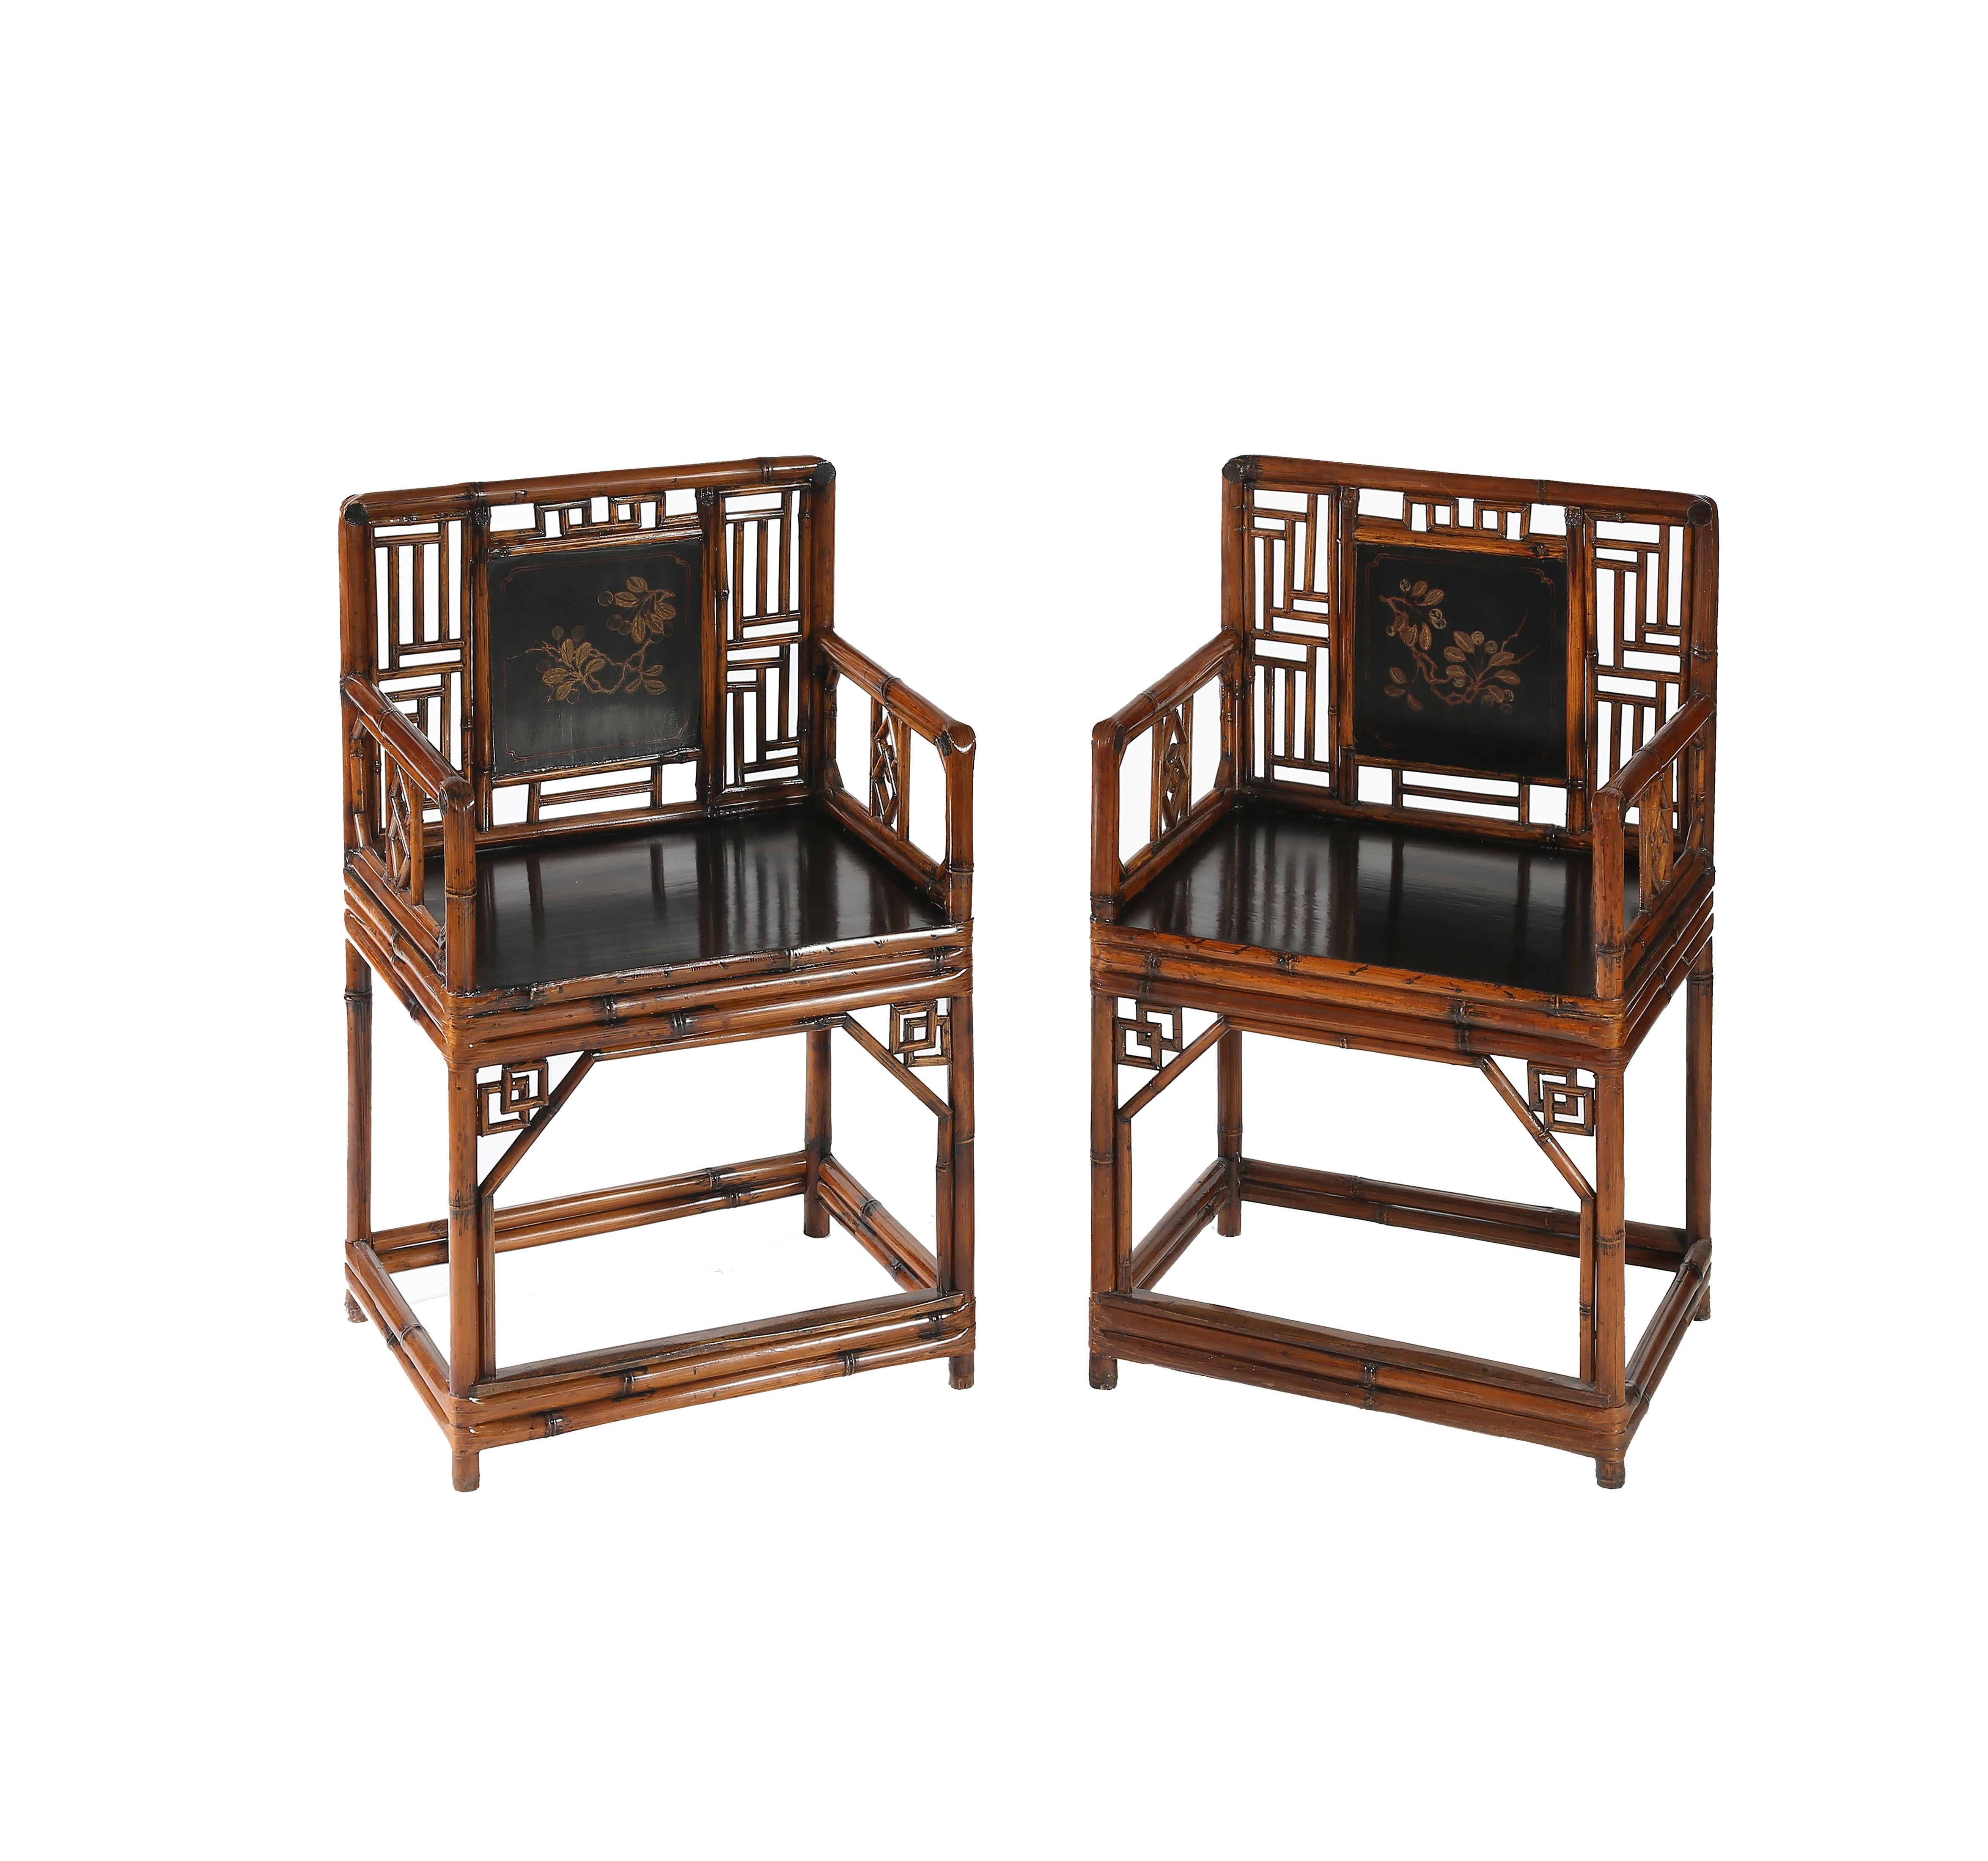 Fine set of bamboo armchairs

The rectangular back decorated with lattice panels enclosing a black lacquered solid panel with gilt floral painting, the arm steam-bent to form the support for the hand rest with a lattice panel support under the mid